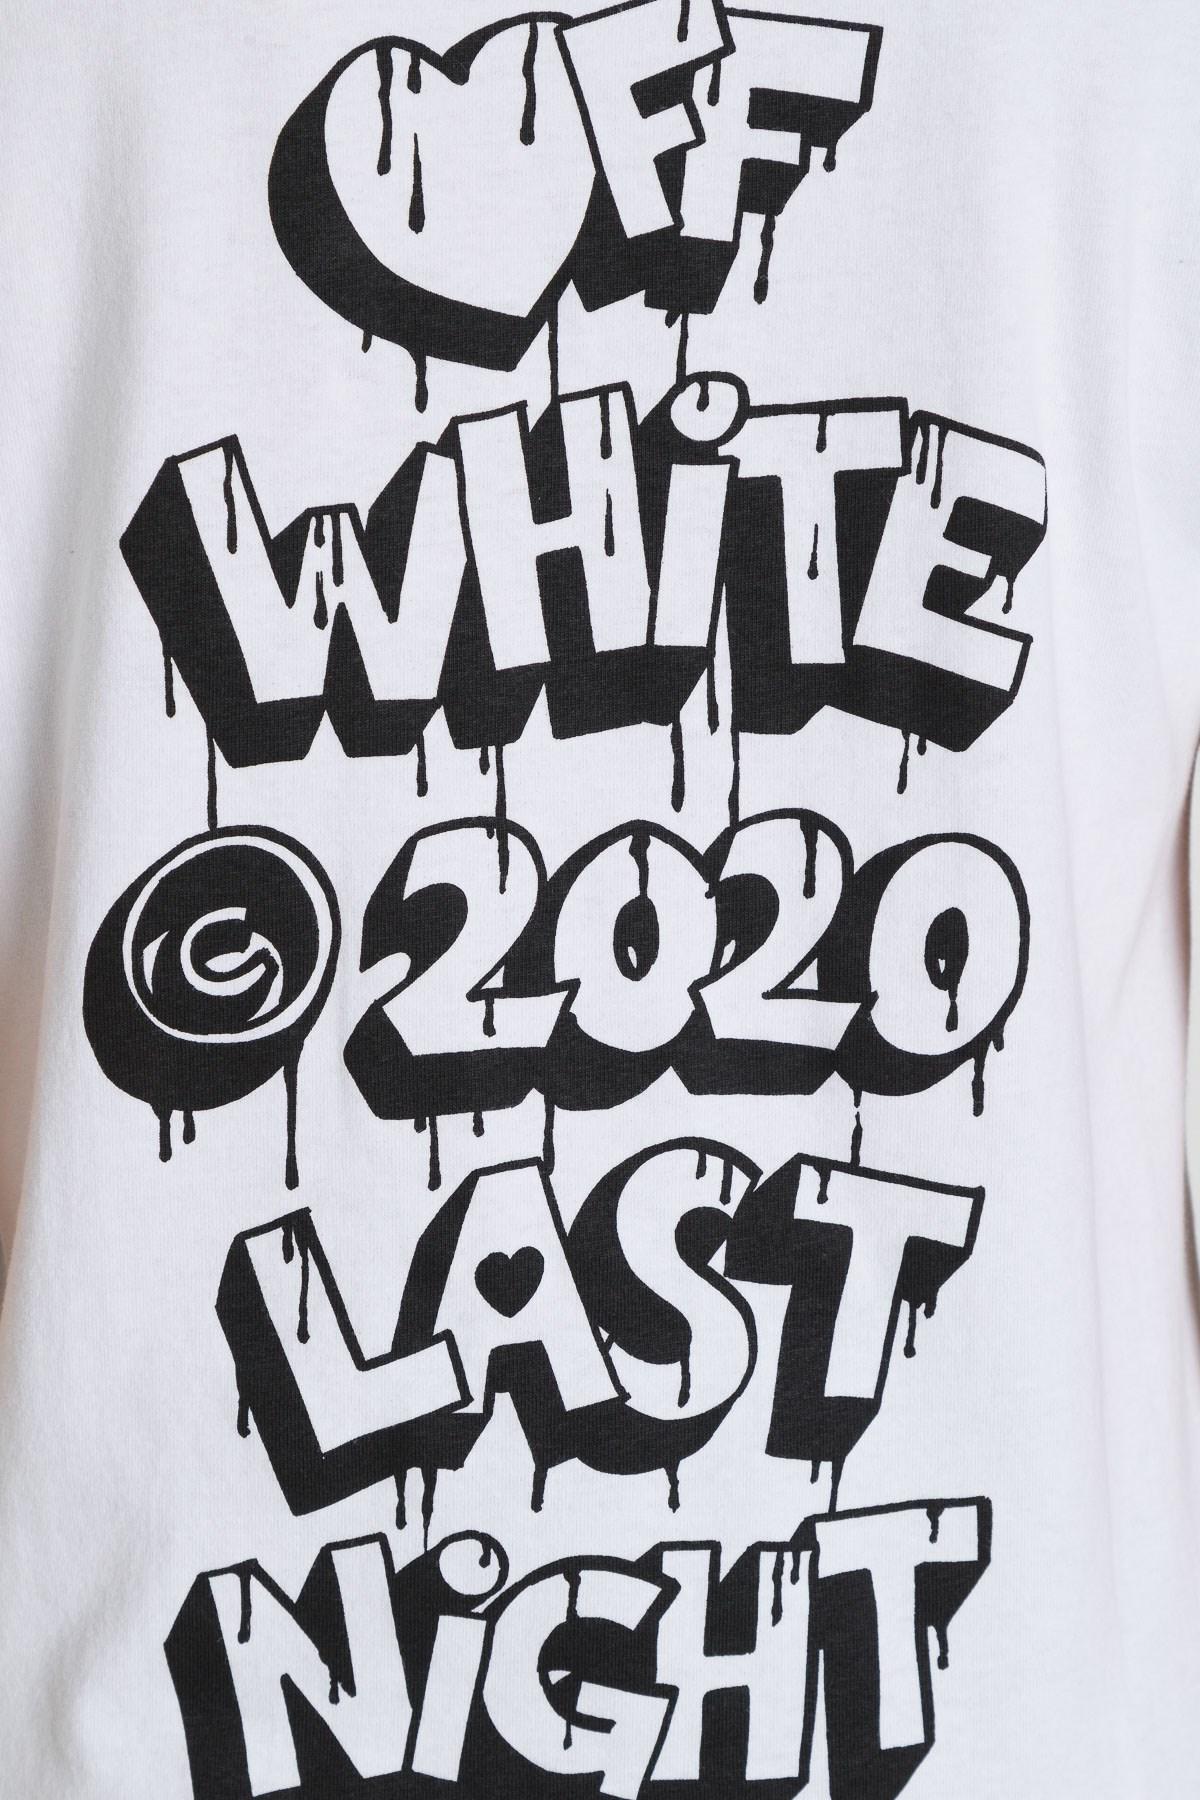 Off-White c/o Virgil Abloh Cotton 2020 Last Night Tee in White - Lyst